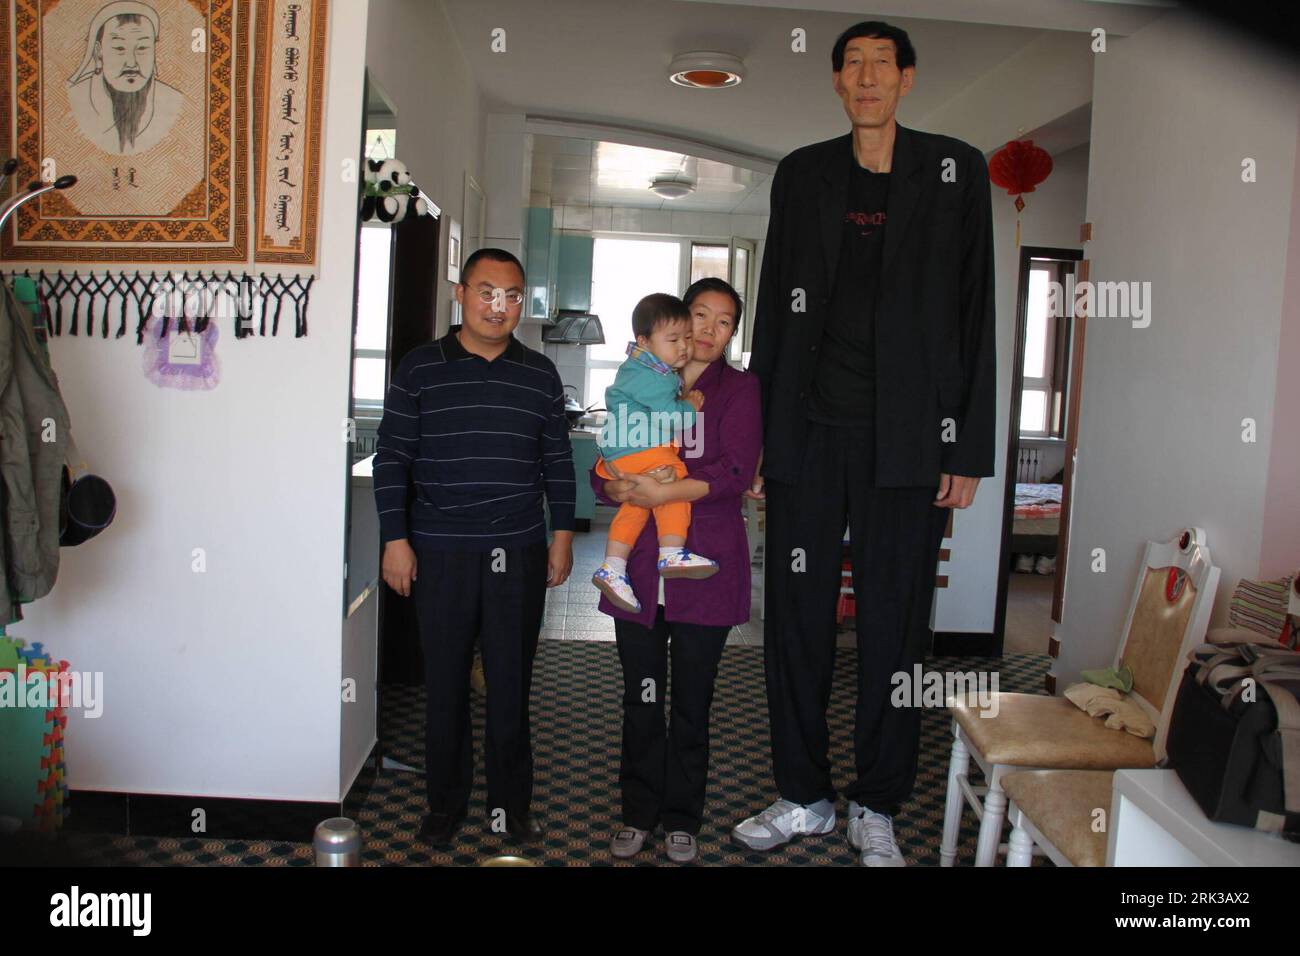 Bildnummer: 53401060  Datum: 21.09.2009  Copyright: imago/Xinhua  -- CHIFENG,  (Xinhua) -- 2.36-meters-high Chinese herdsman Bao Xishun, the previous world s tallest man, stands with his family members and friends at his home, in Chifeng City, north China s Inner Mongolia Autonomous Region, Sept. 21, 2009. The Guinness World Records announced on September 16 that 27-year-old turkish man Sultan Kosen, having his height validated at 2.465 metres, takes over the title of the world s tallest man from China s Bao Xishun. Kosen s record was unveiled to mark the launch of the Guinness World Records 2 Stock Photo